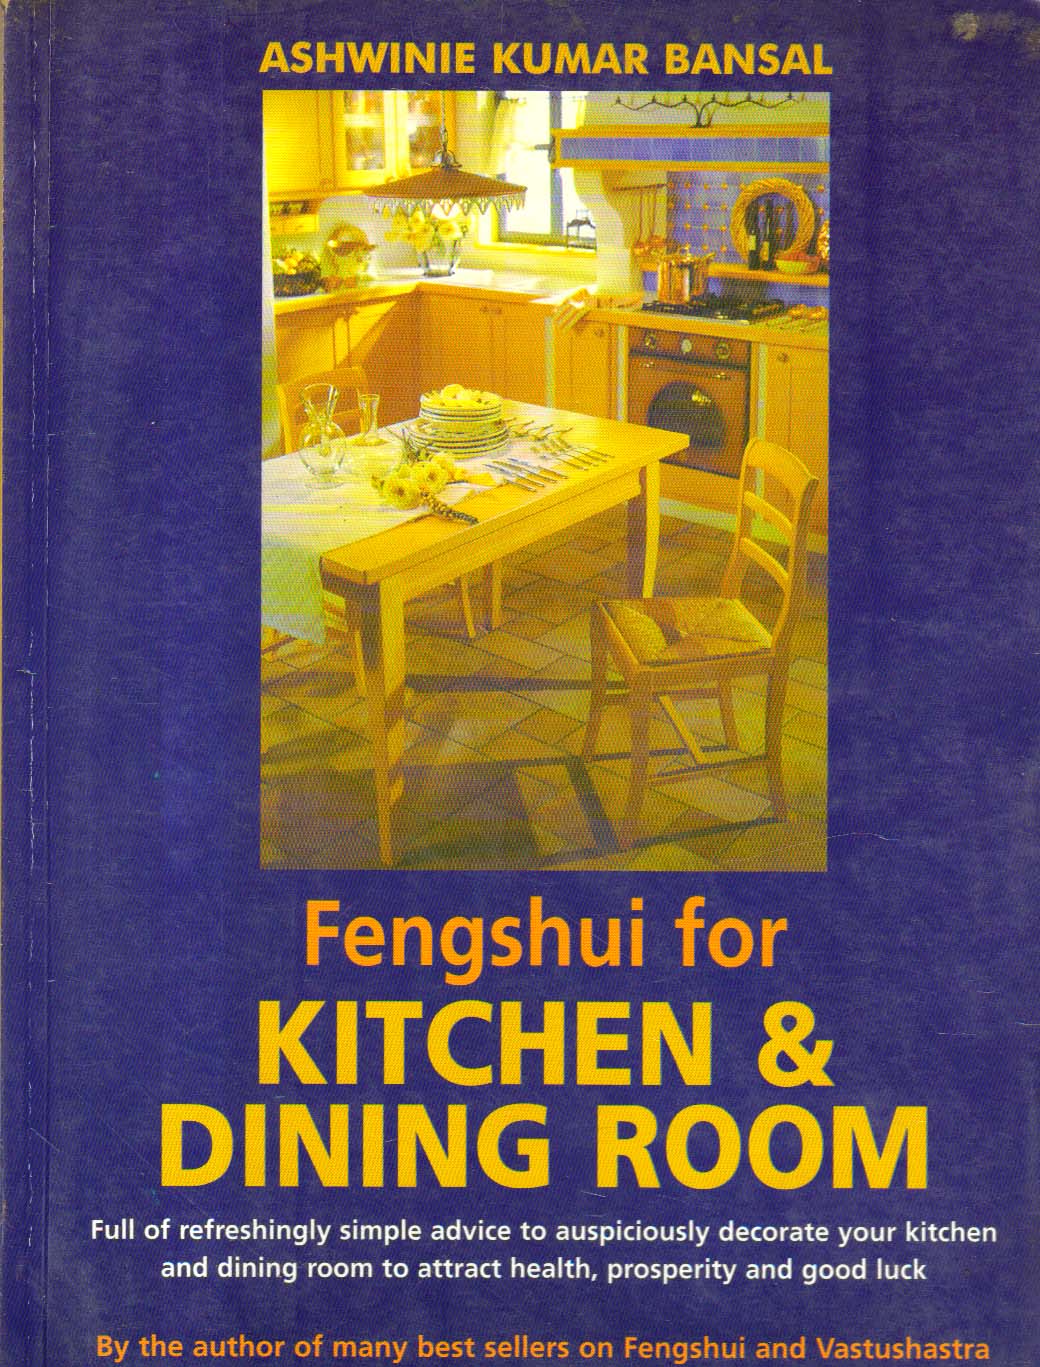 Fengshui for Kitchen & Dining Room.